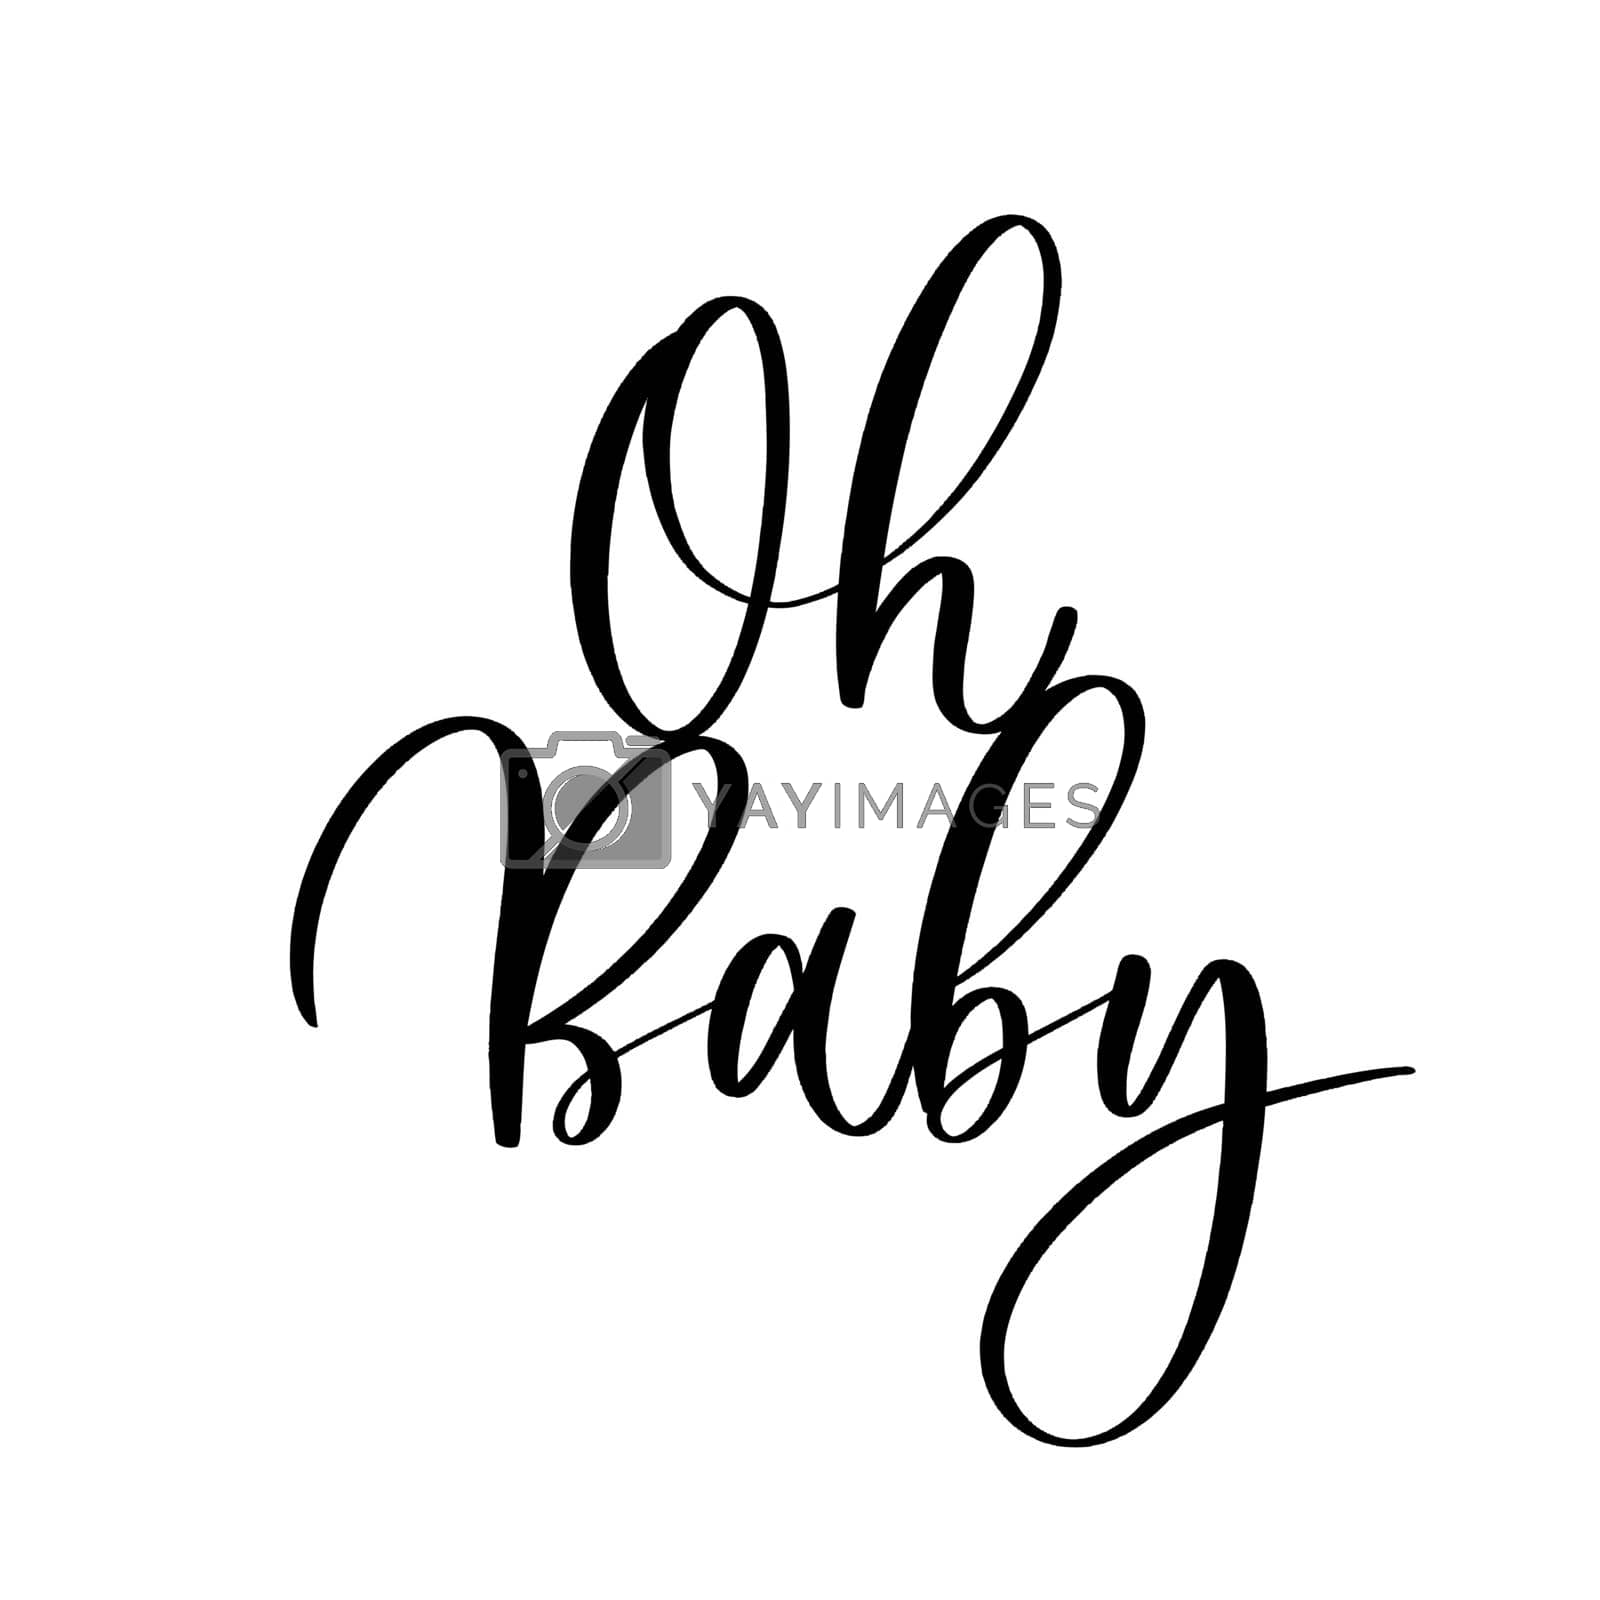 Oh Baby. Baby shower inscription for babies clothes and nursery decorations